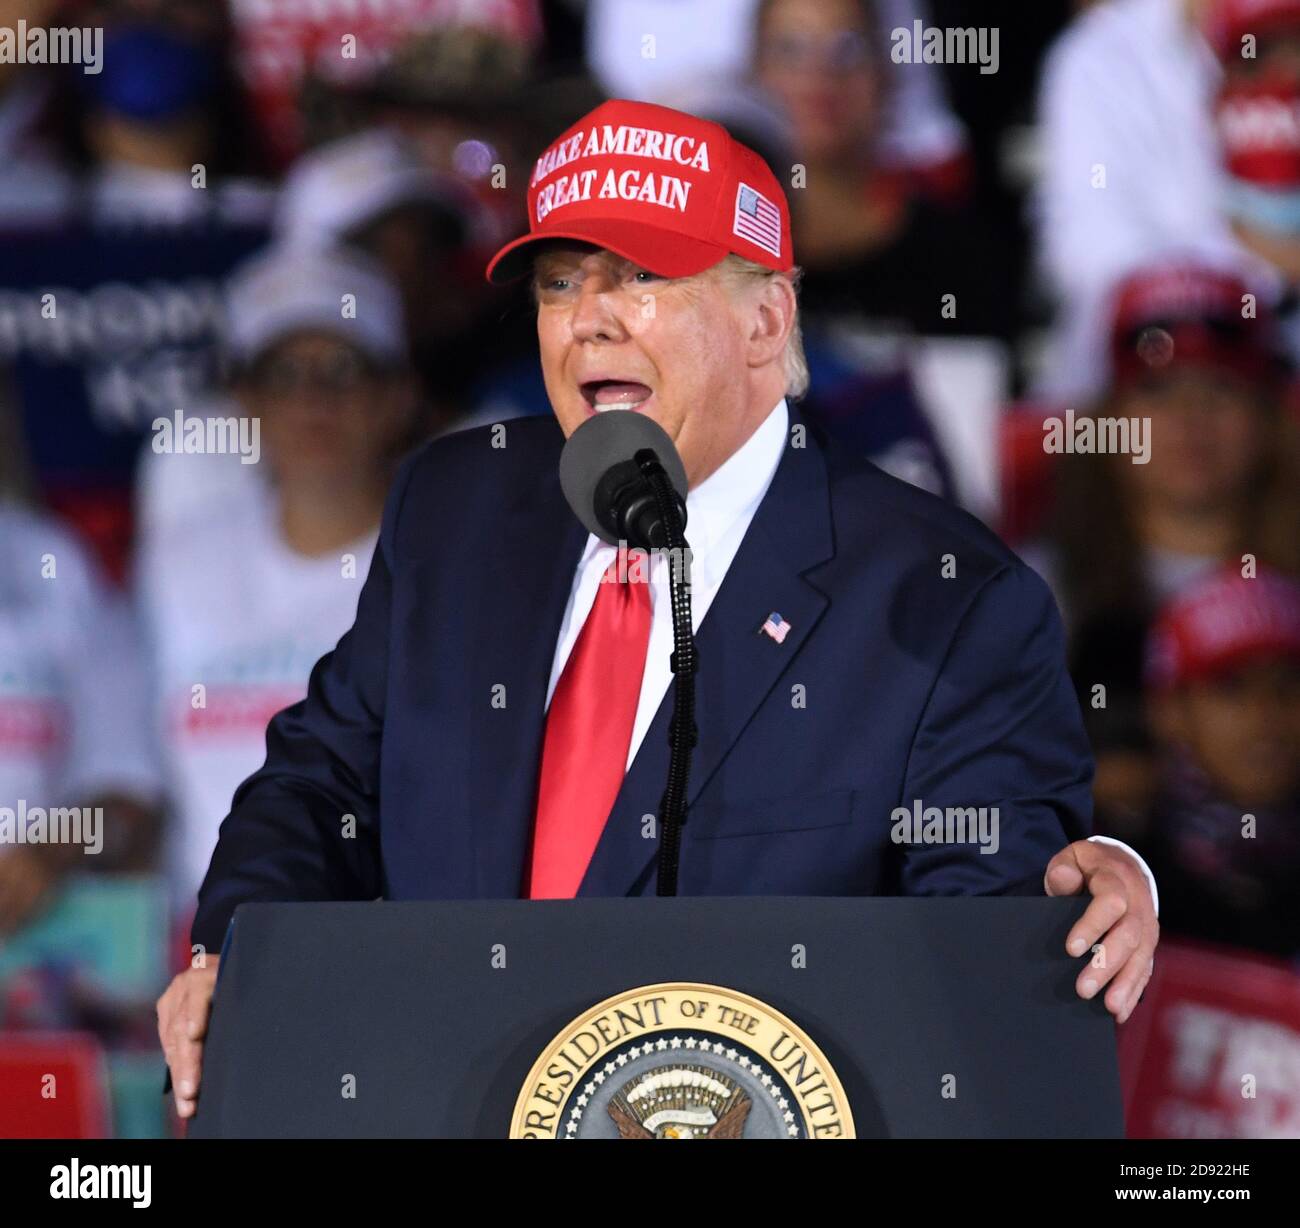 Opa Locka, United States. 01st Nov, 2020. November 1, 2020 - Opa-Locka, Florida, United States - U.S. President Donald Trump speaks at a campaign rally at Miami-Opa Locka Executive Airport on November 1, 2020 in Opa-Locka, Florida. President Trump held events in five states today, as he continues his campaign against Democratic presidential nominee Joe Biden two days before the November 3 election. Credit: Paul Hennessy/Alamy Live News Stock Photo